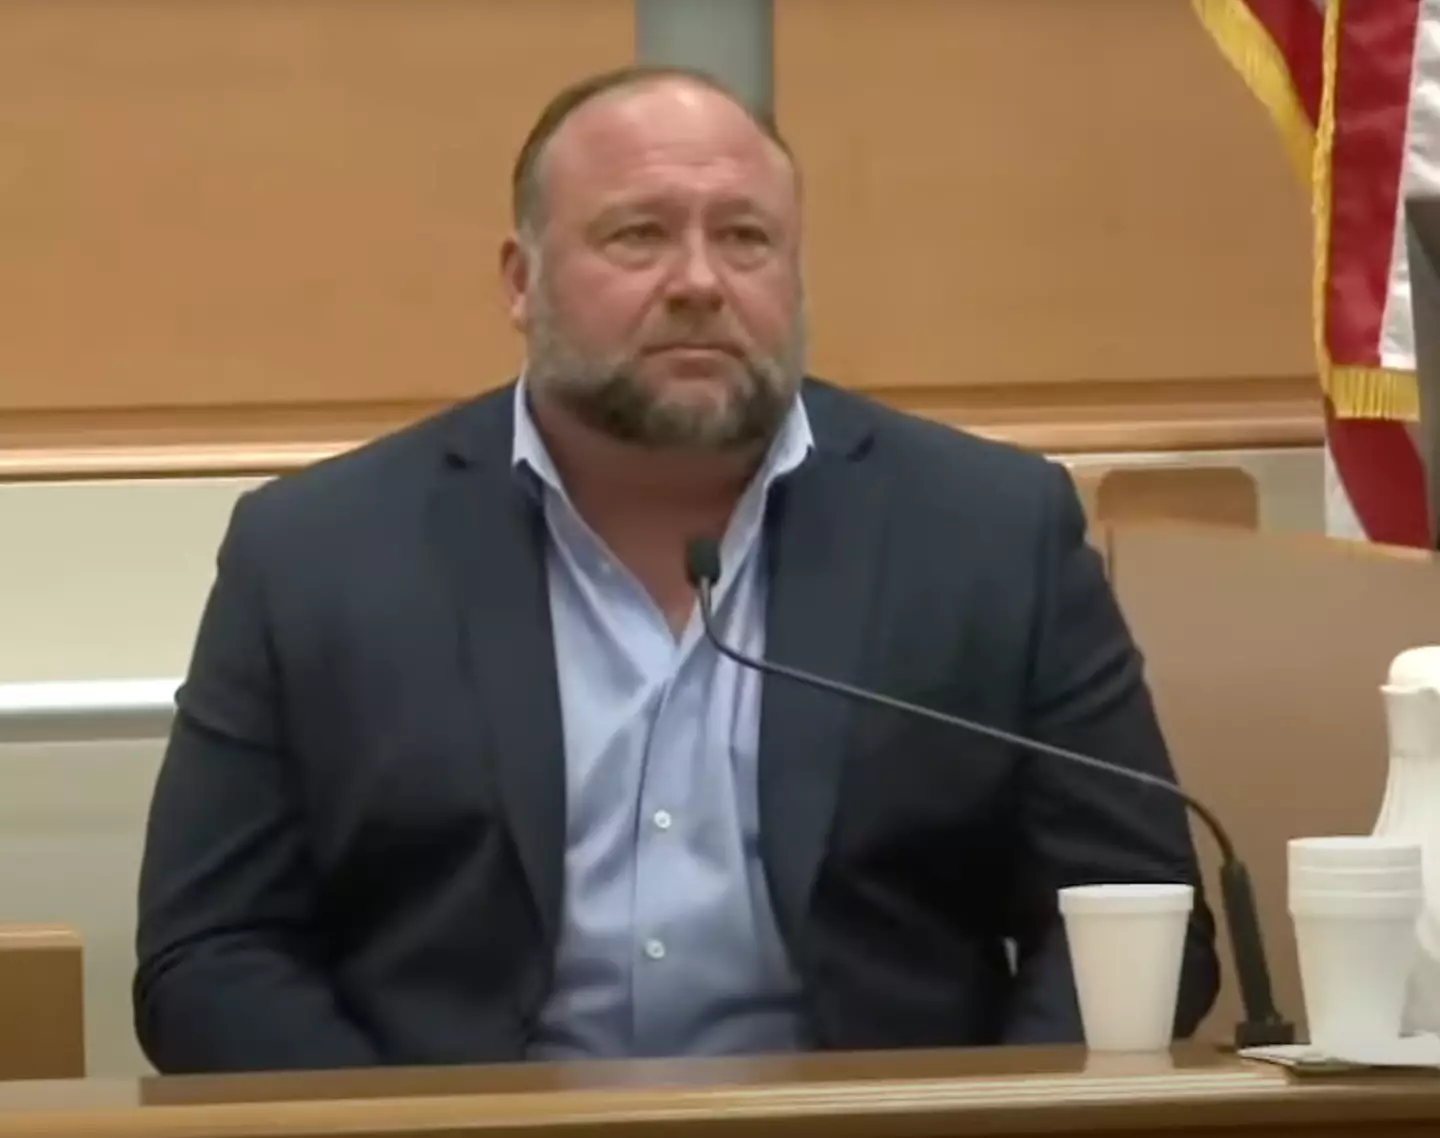 Last December, the Infowars host filed for personal bankruptcy protection in Texas as he faced nearly $1.5 billion in damages over conspiracy theories he spread about the 2012 Sandy Hook school massacre.